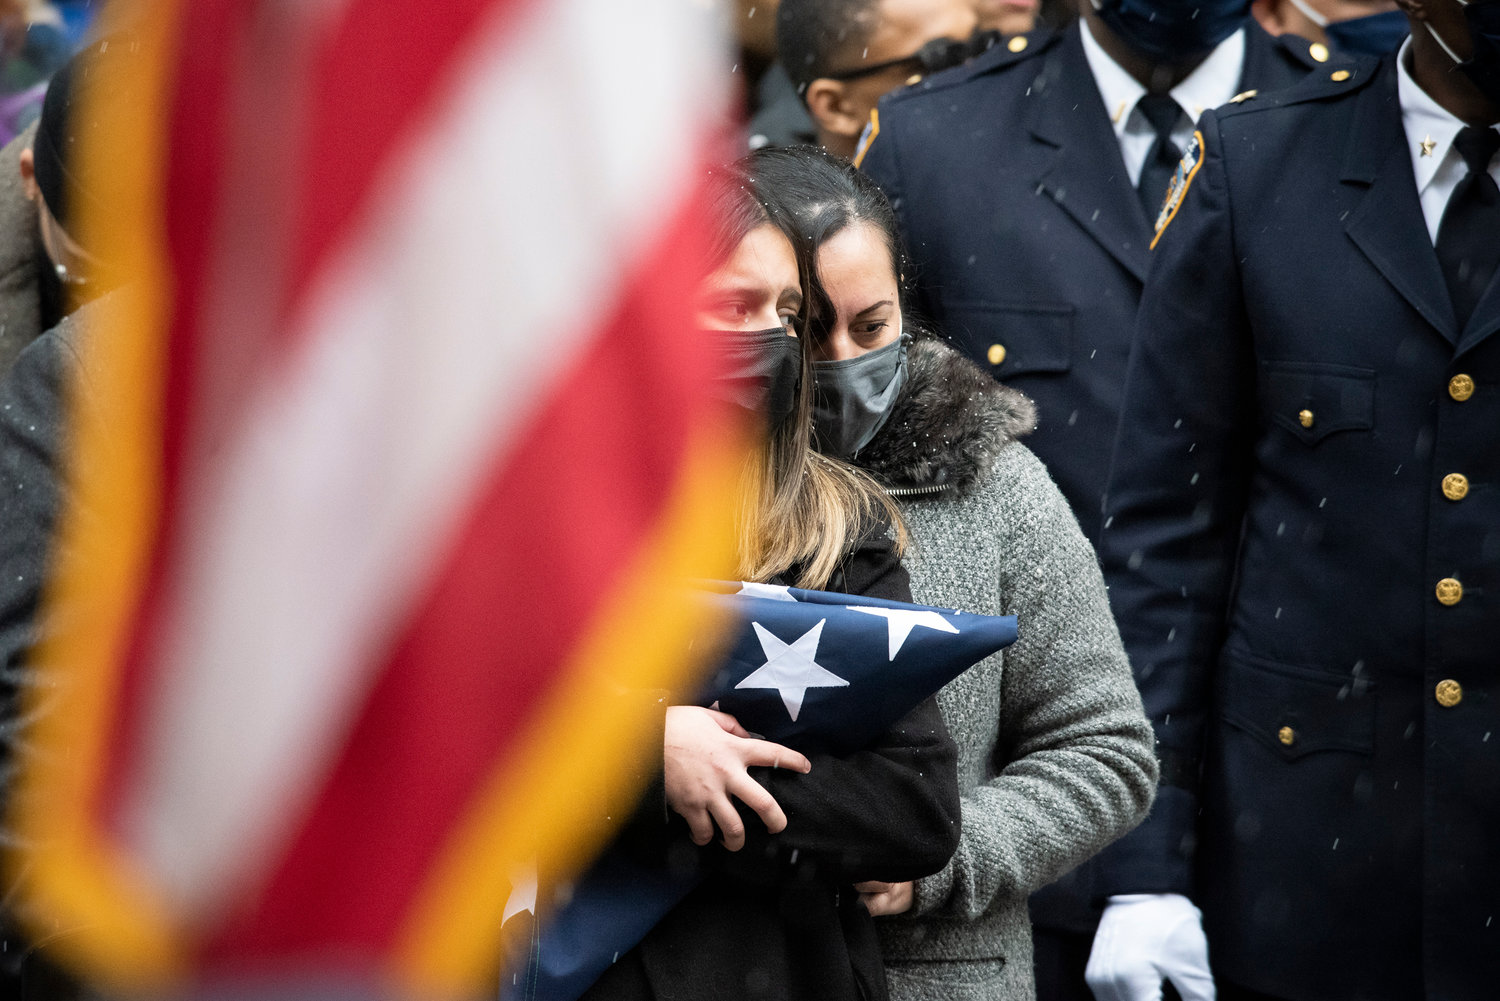 Det. Rivera’s widow, Dominique Luzuriaga, holds the folded flag presented to her outside St. Patrick’s Cathedral Jan. 28.